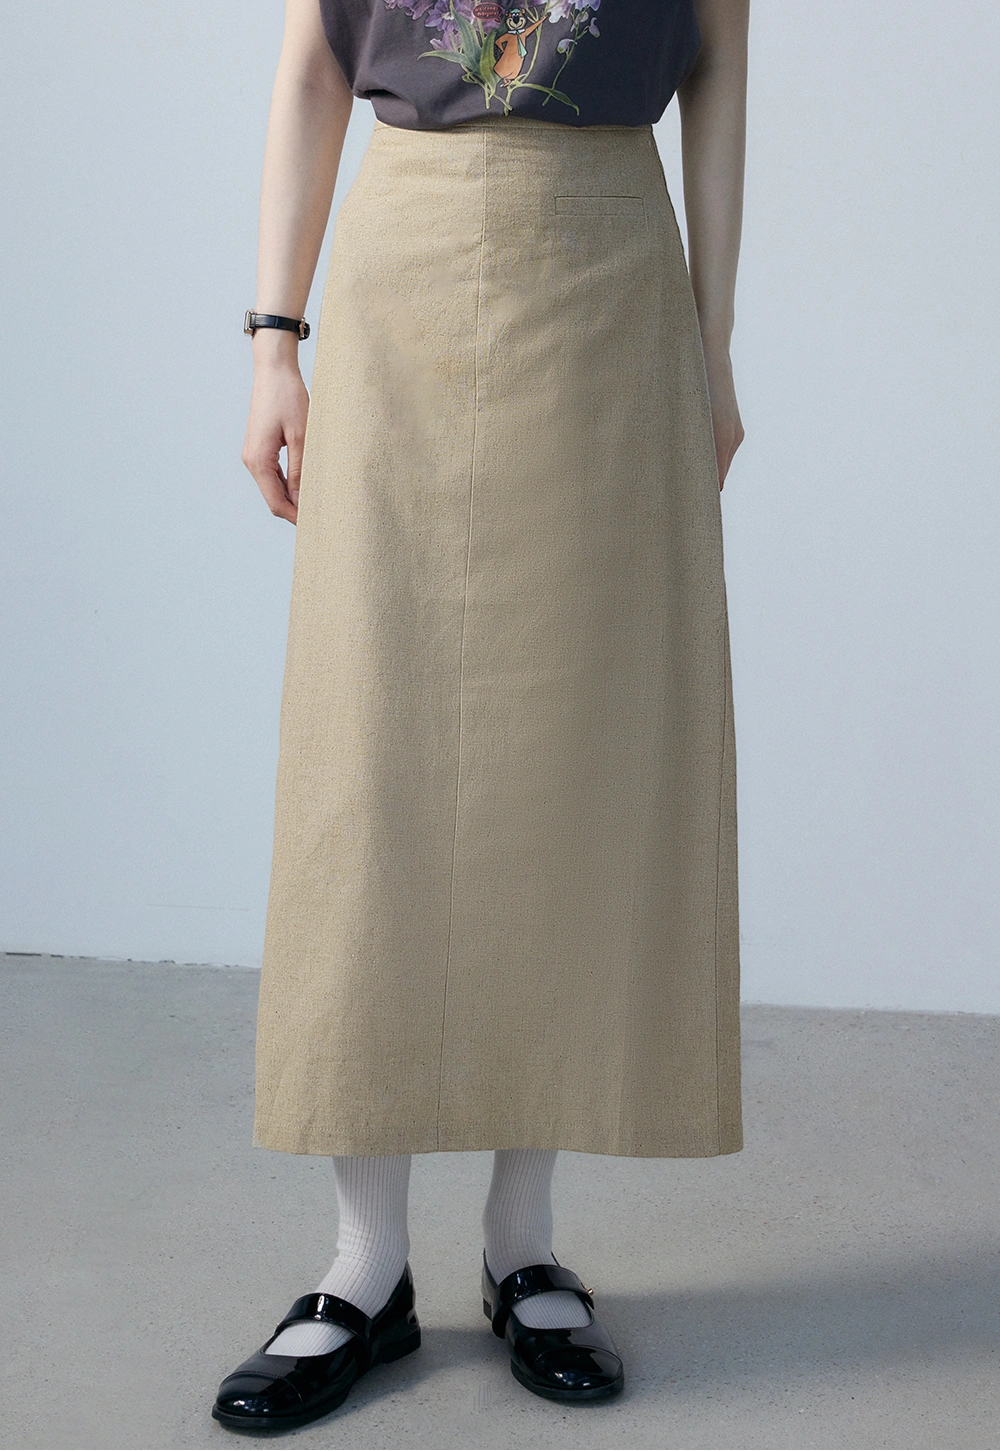 Women's A-Line Midi Skirt with Pocket